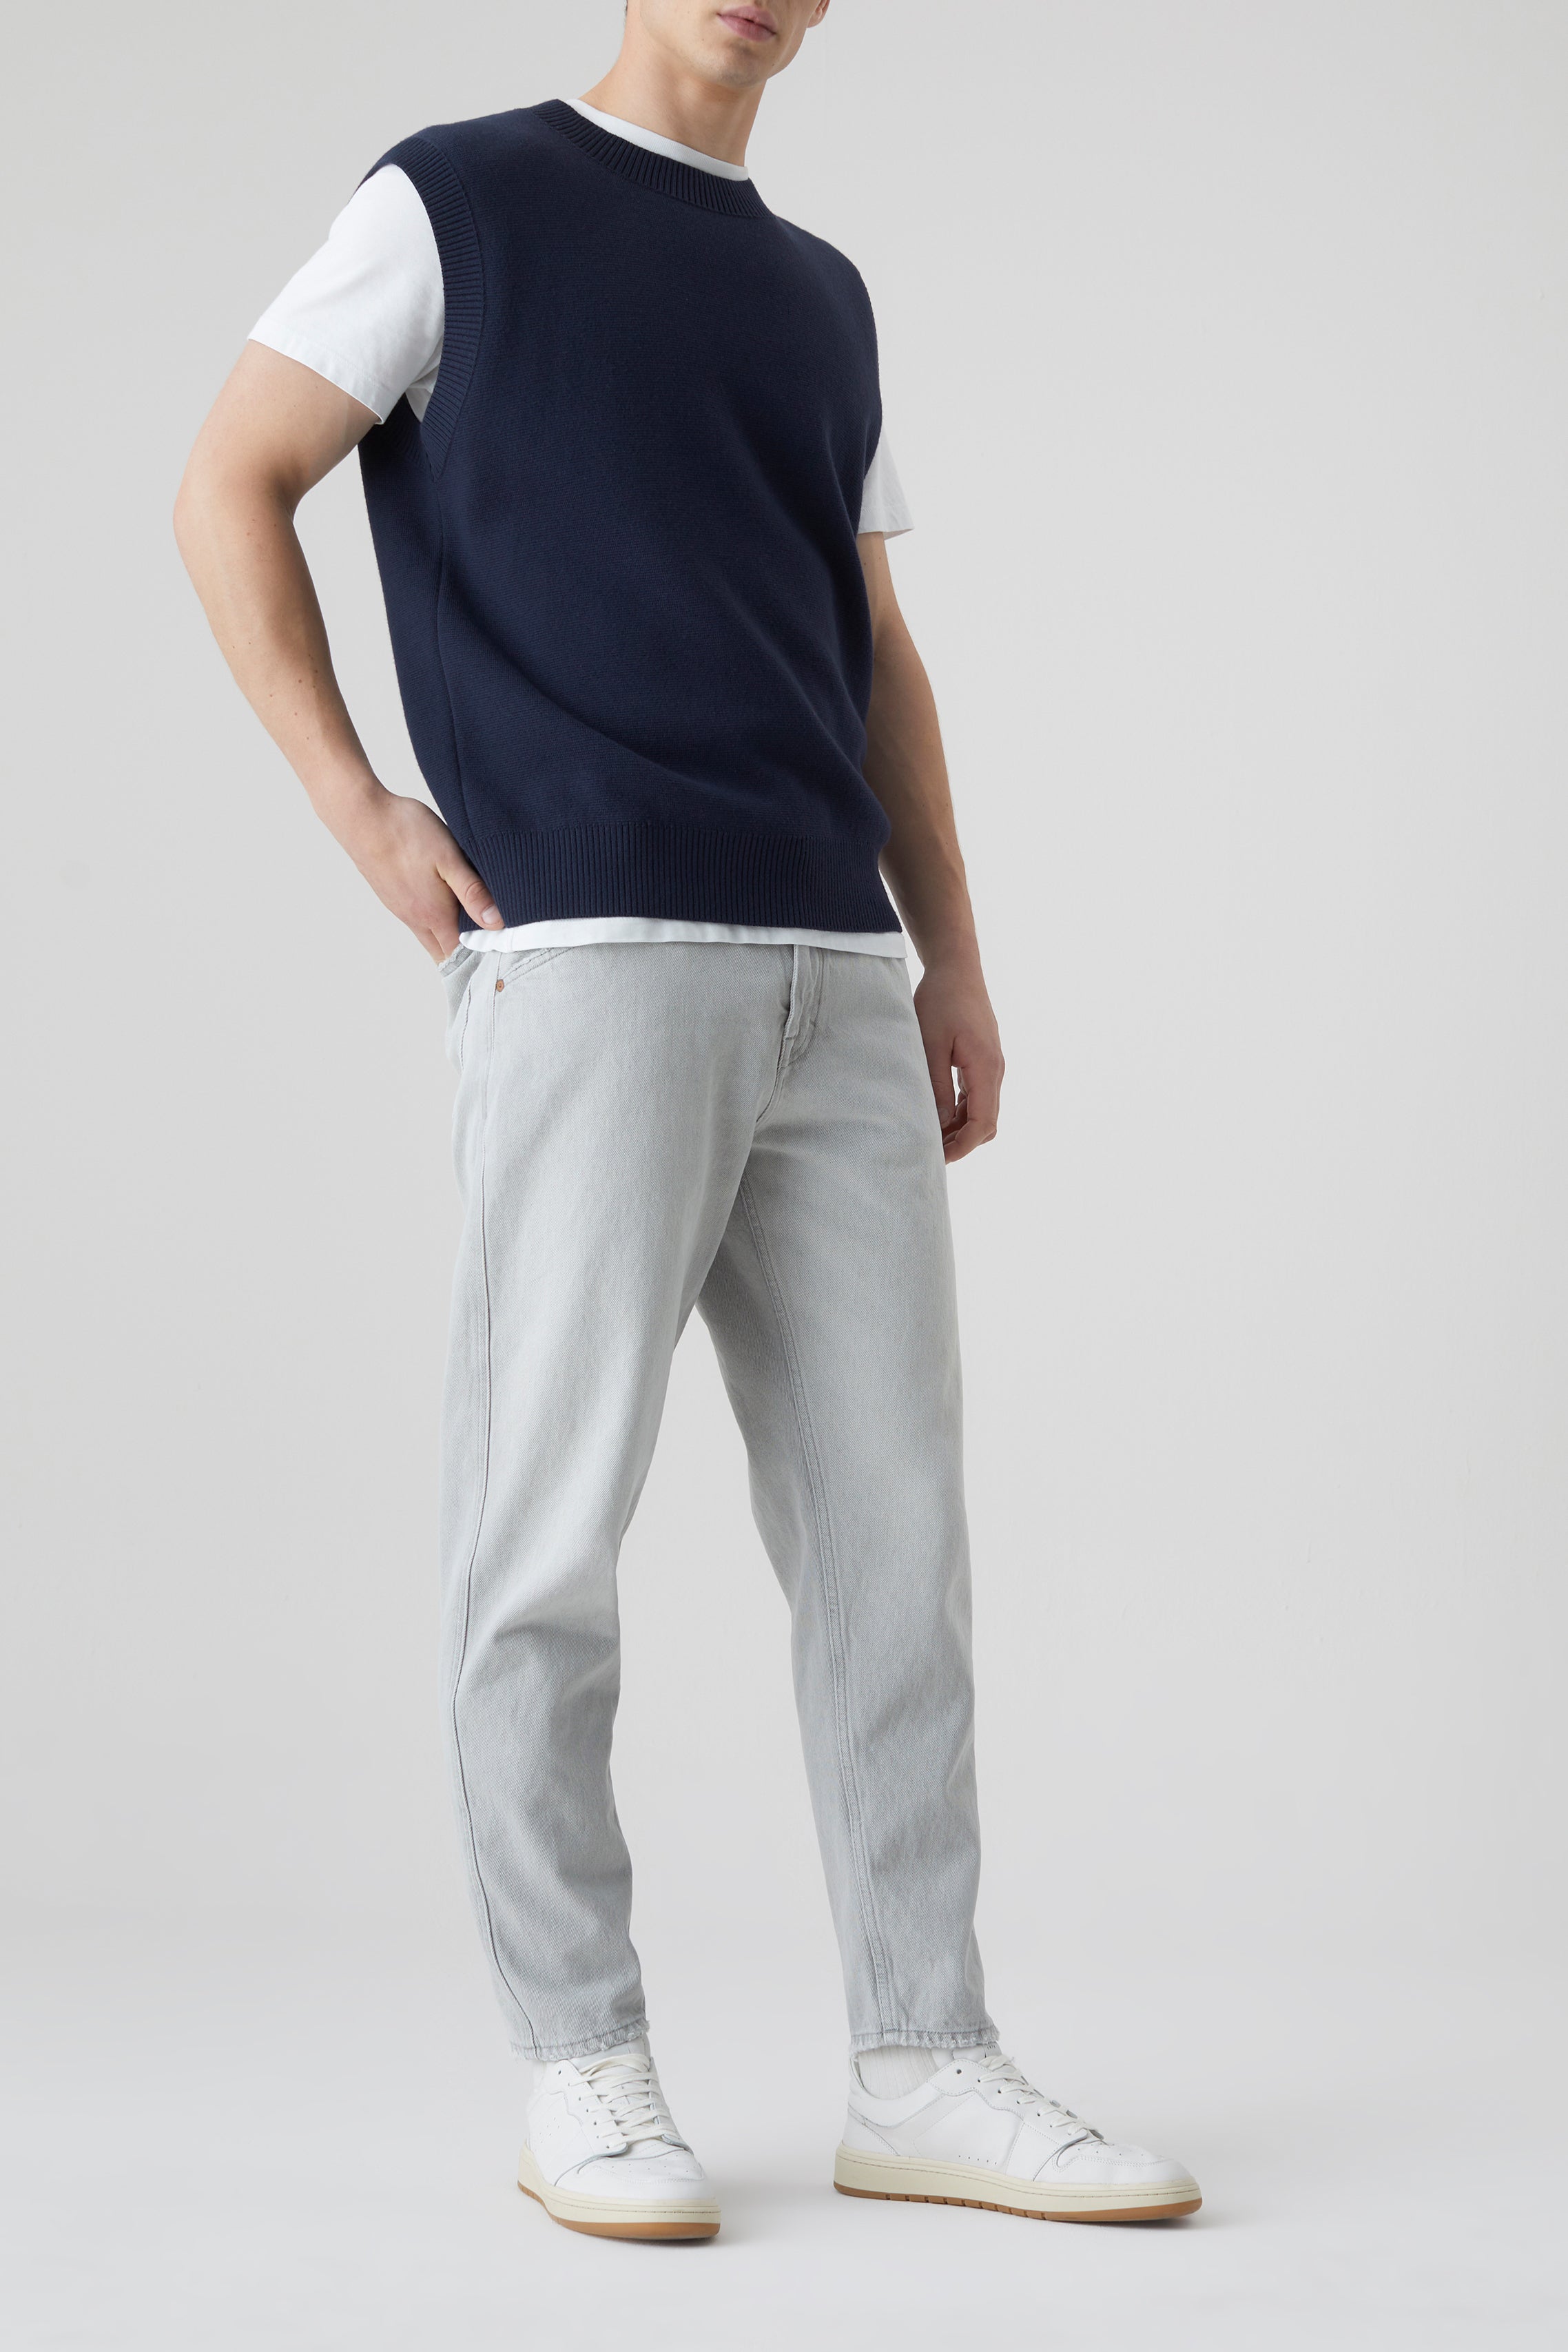 STYLE NAME X-LENT TAPERED JEANS